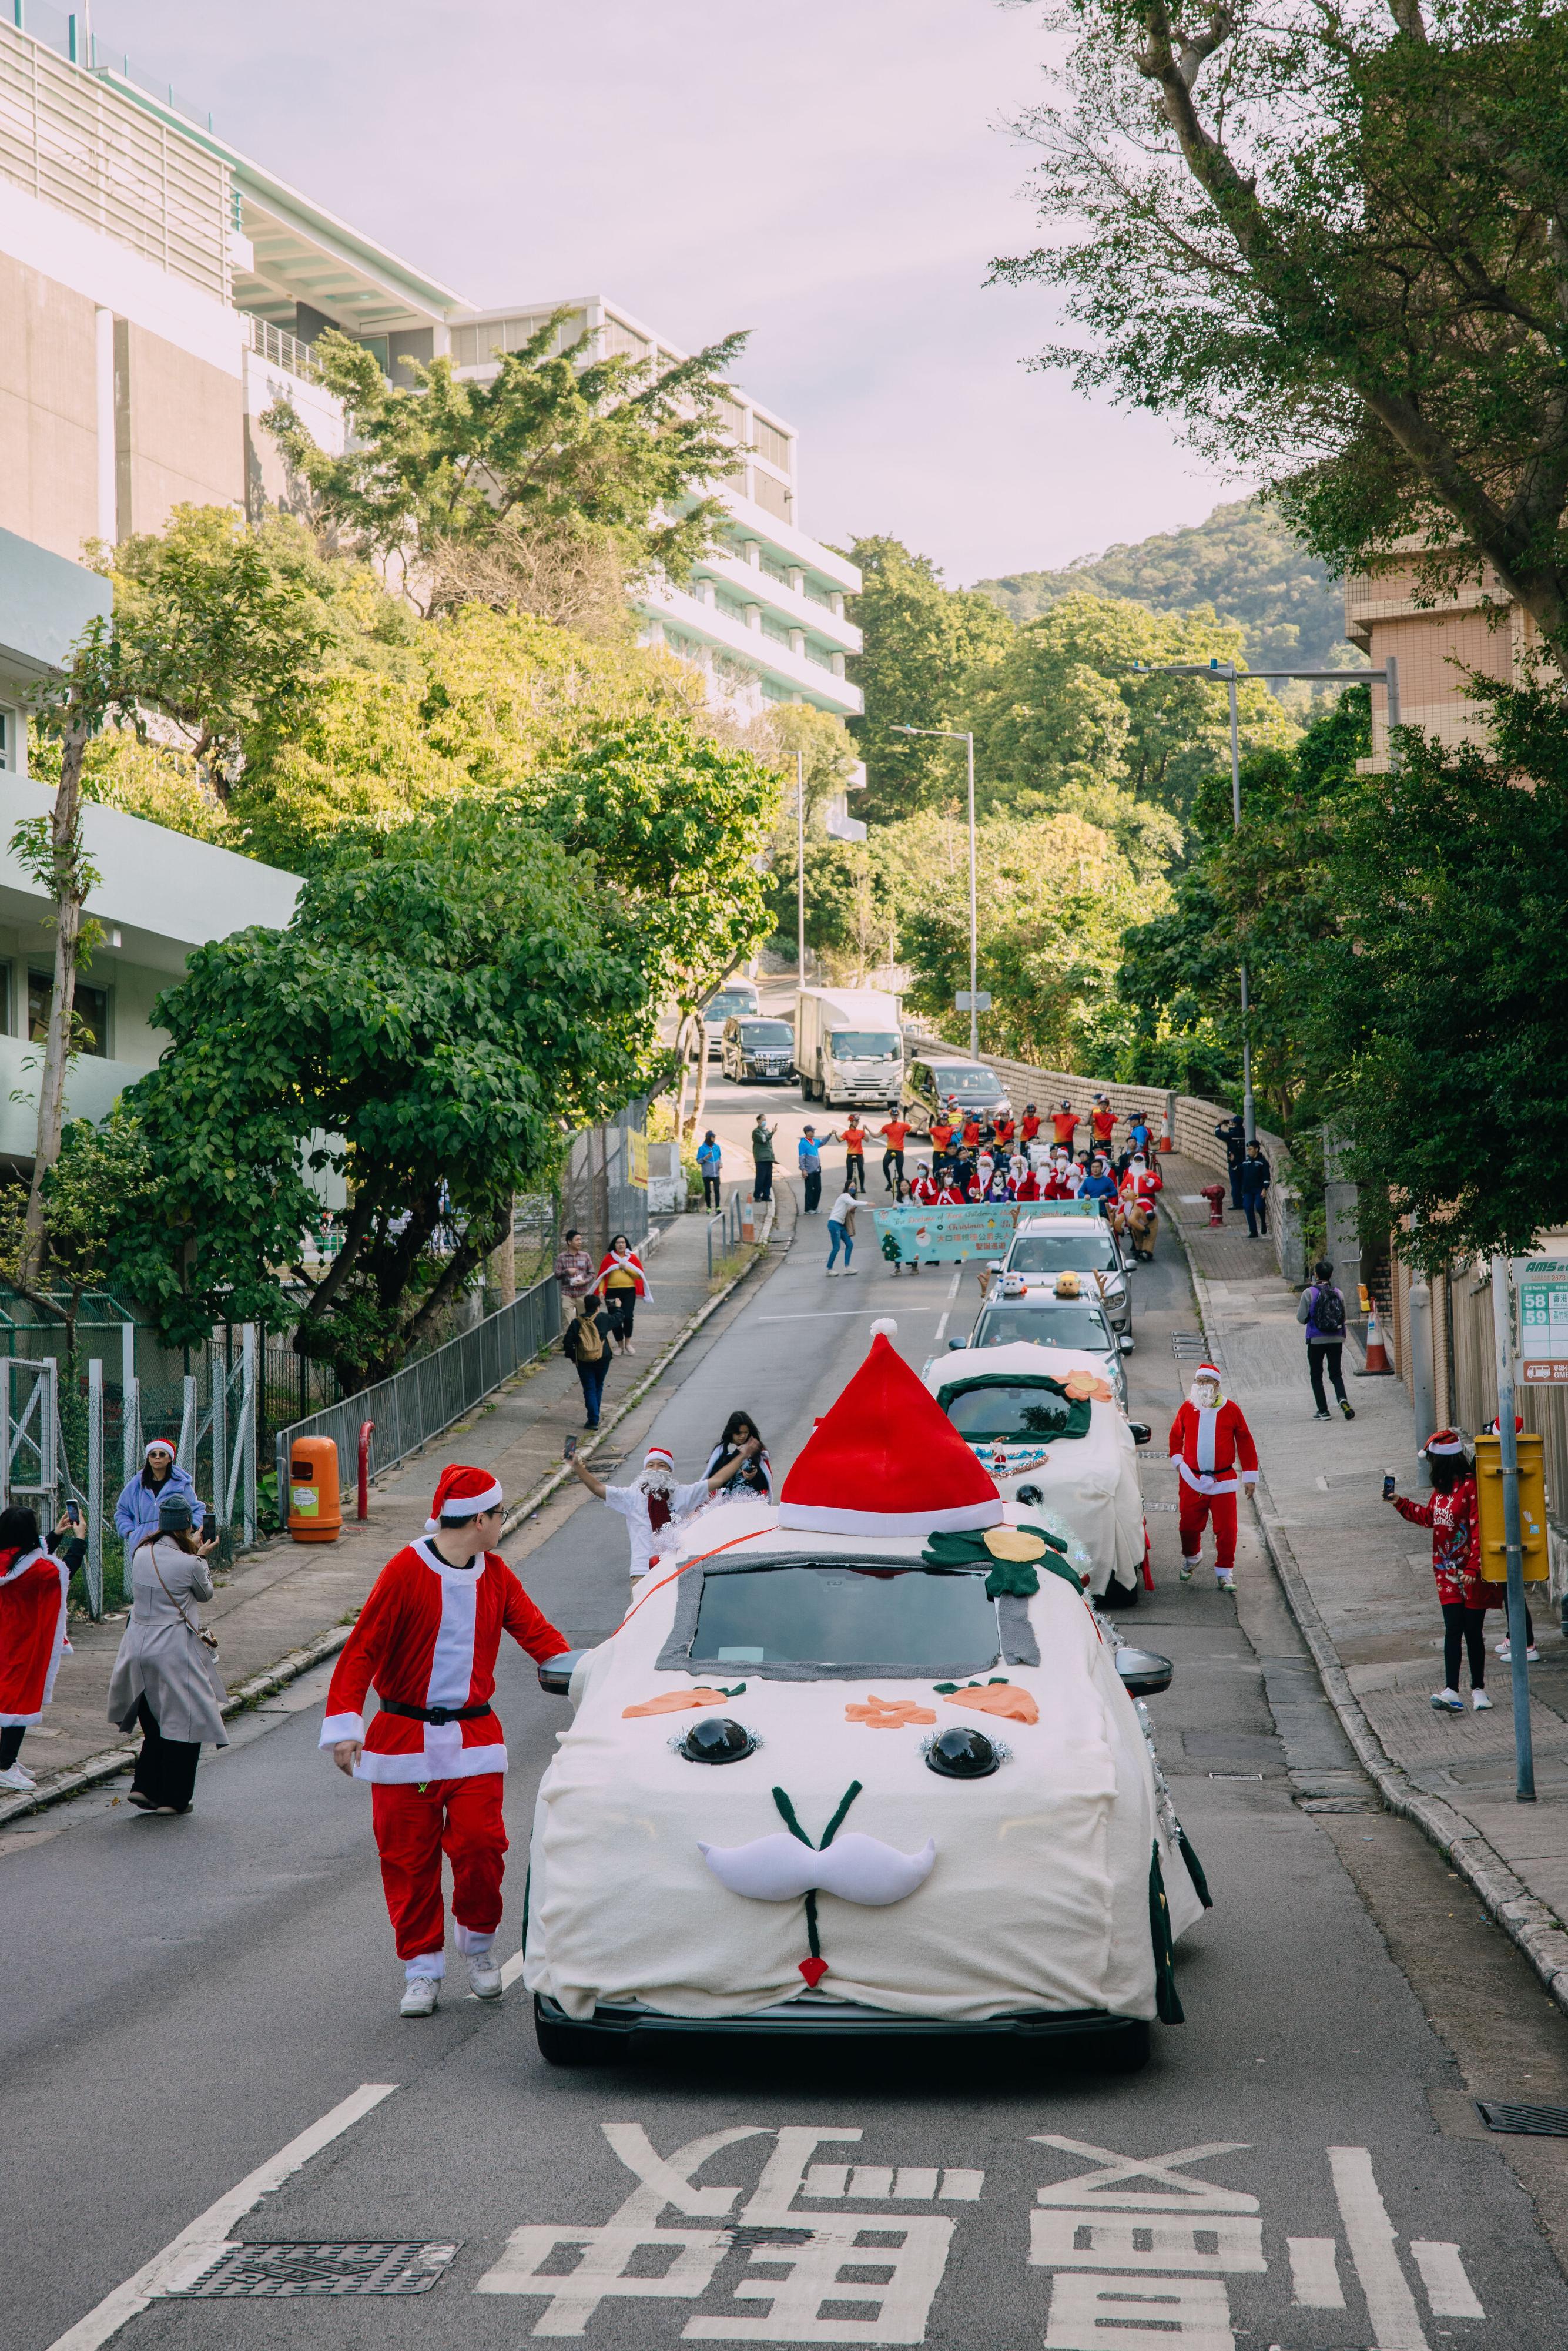 The Duchess of Kent Children's Hospital at Sandy Bay resumed to organise a parade this year, with Santa Claus riding in guinea pig-themed vehicles to visit around 30 hospitalised children.